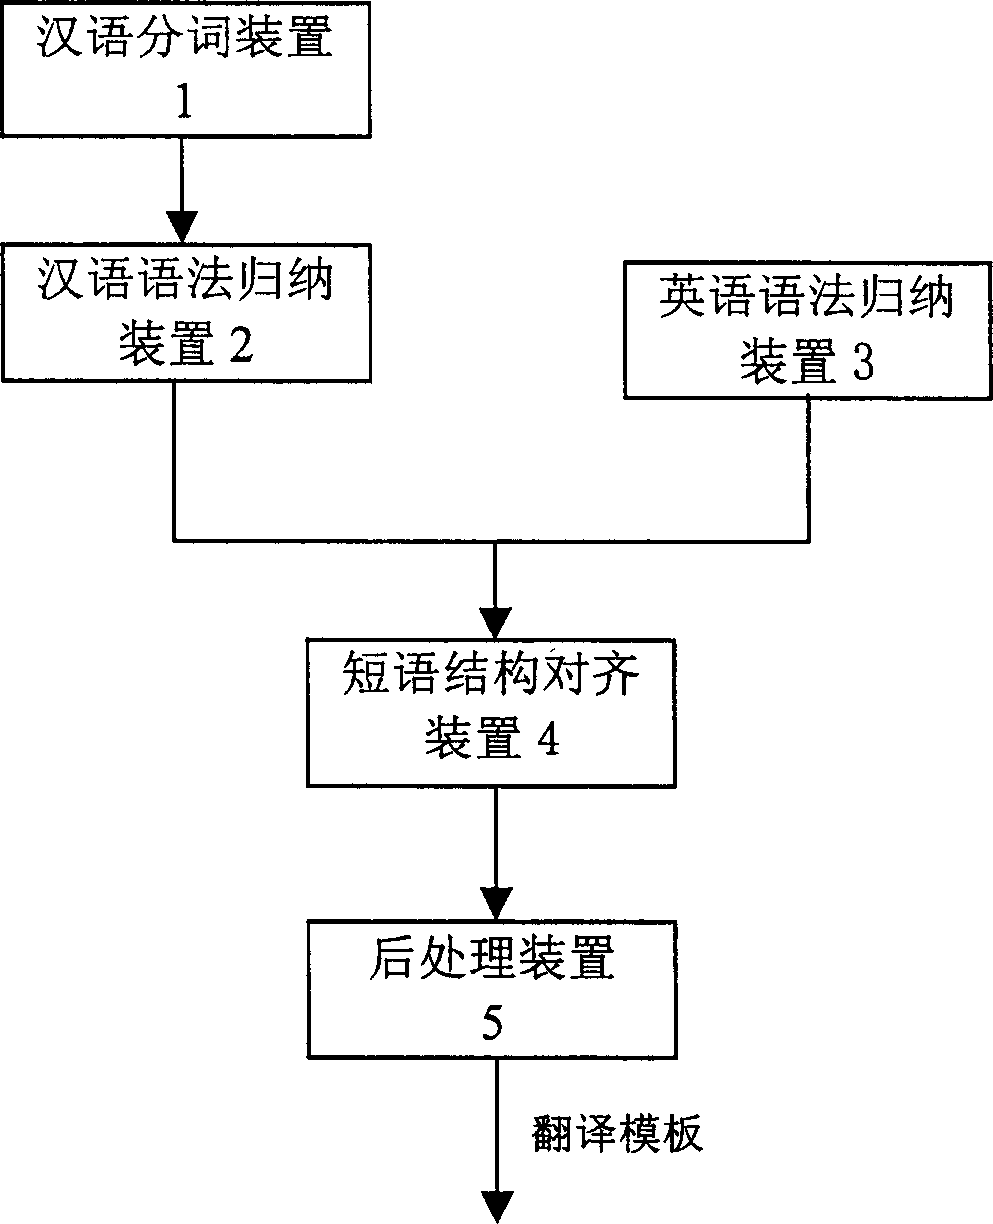 Method and apparatus for automatic acquisition of machine translation template